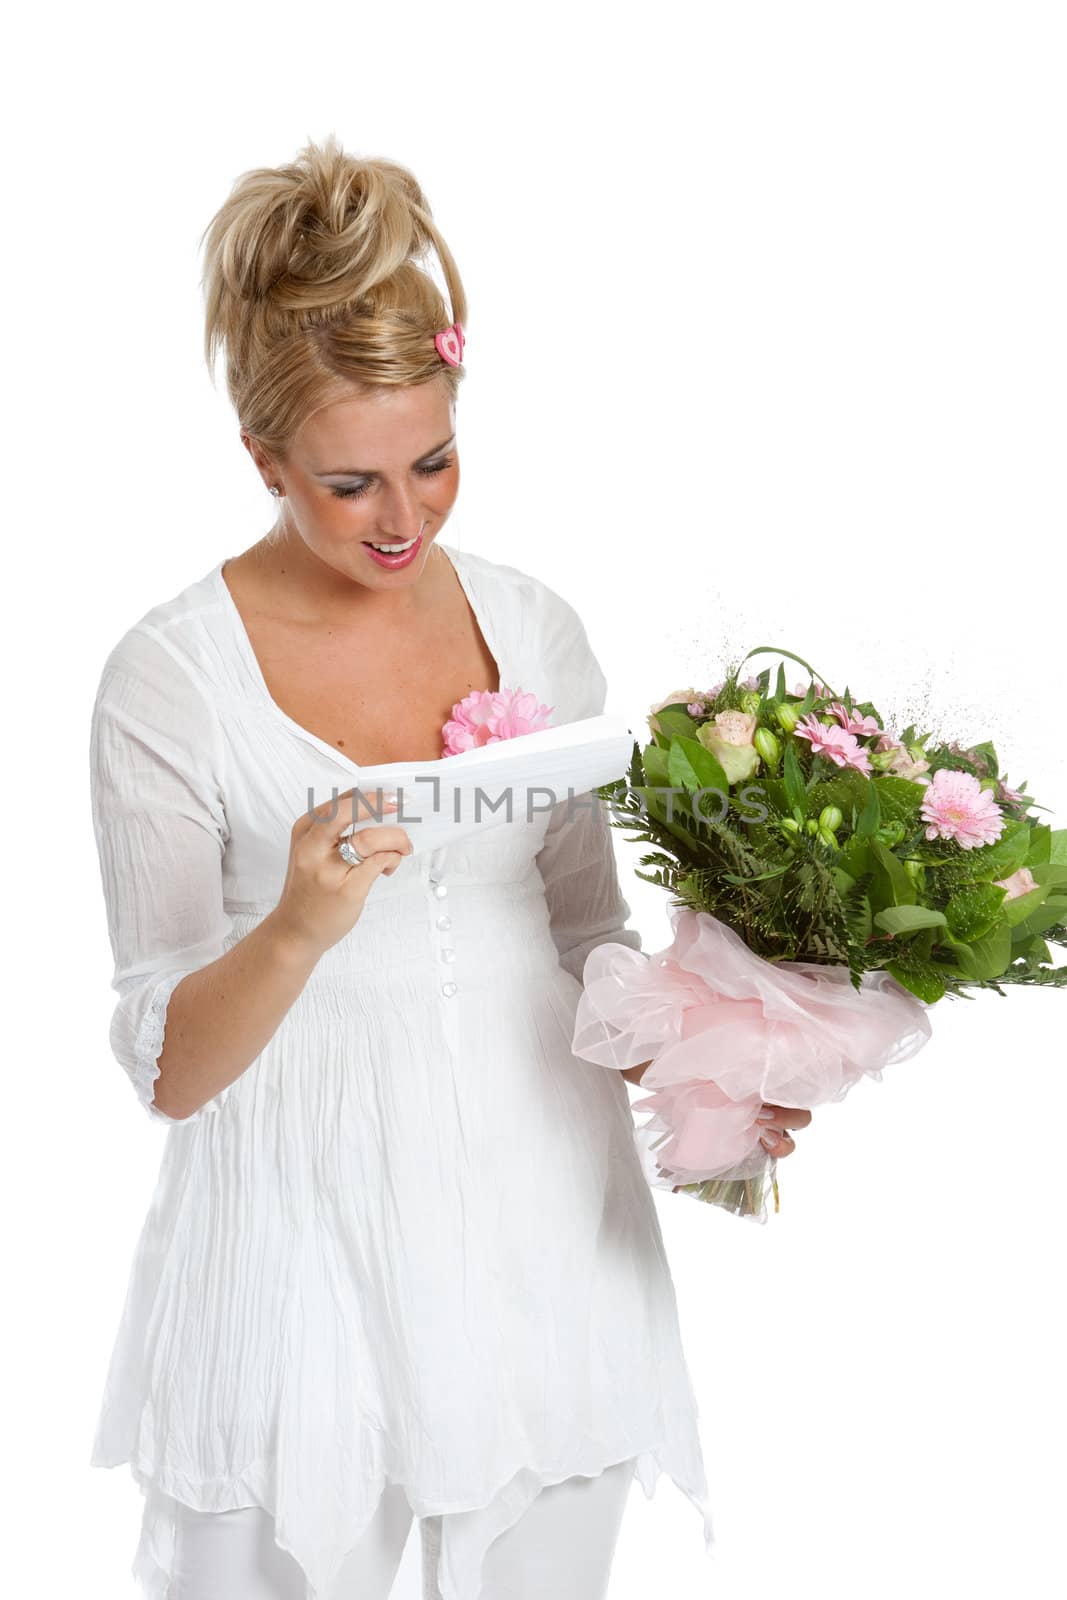 Pretty blond girl receicing a love letter with flowers for valentine